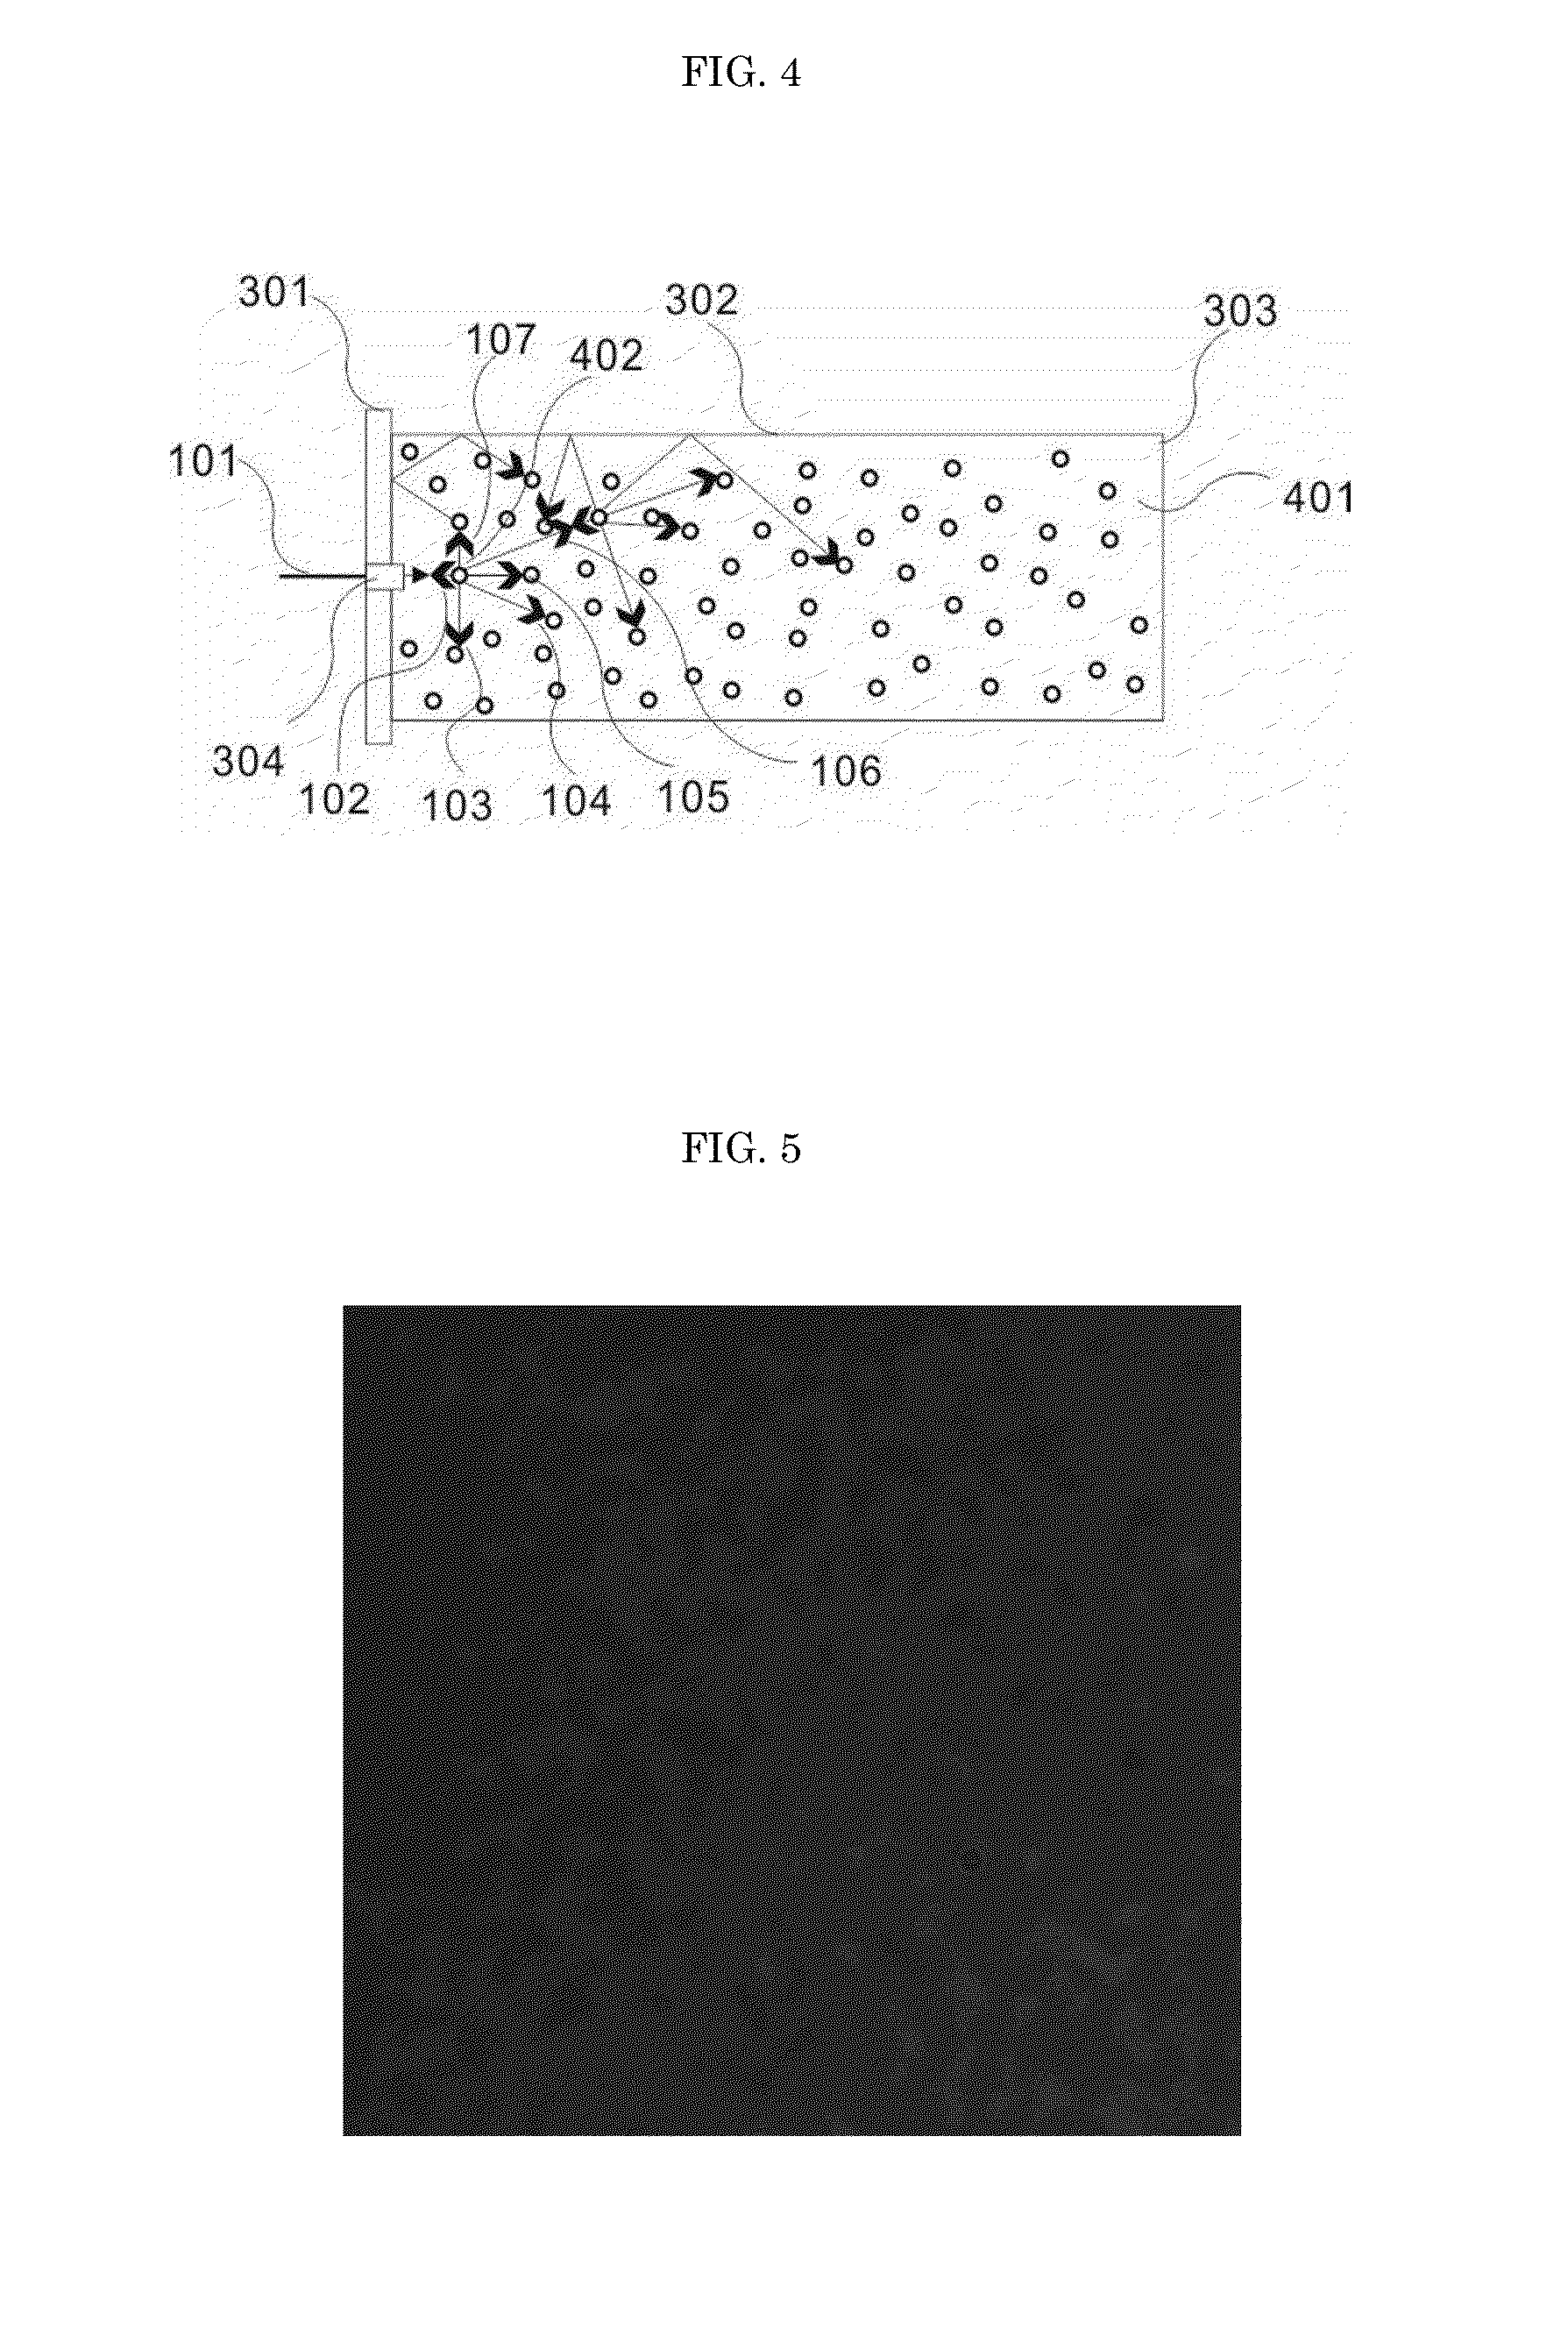 Speckle reduction apparatus based on mie scattering and perturbation drive